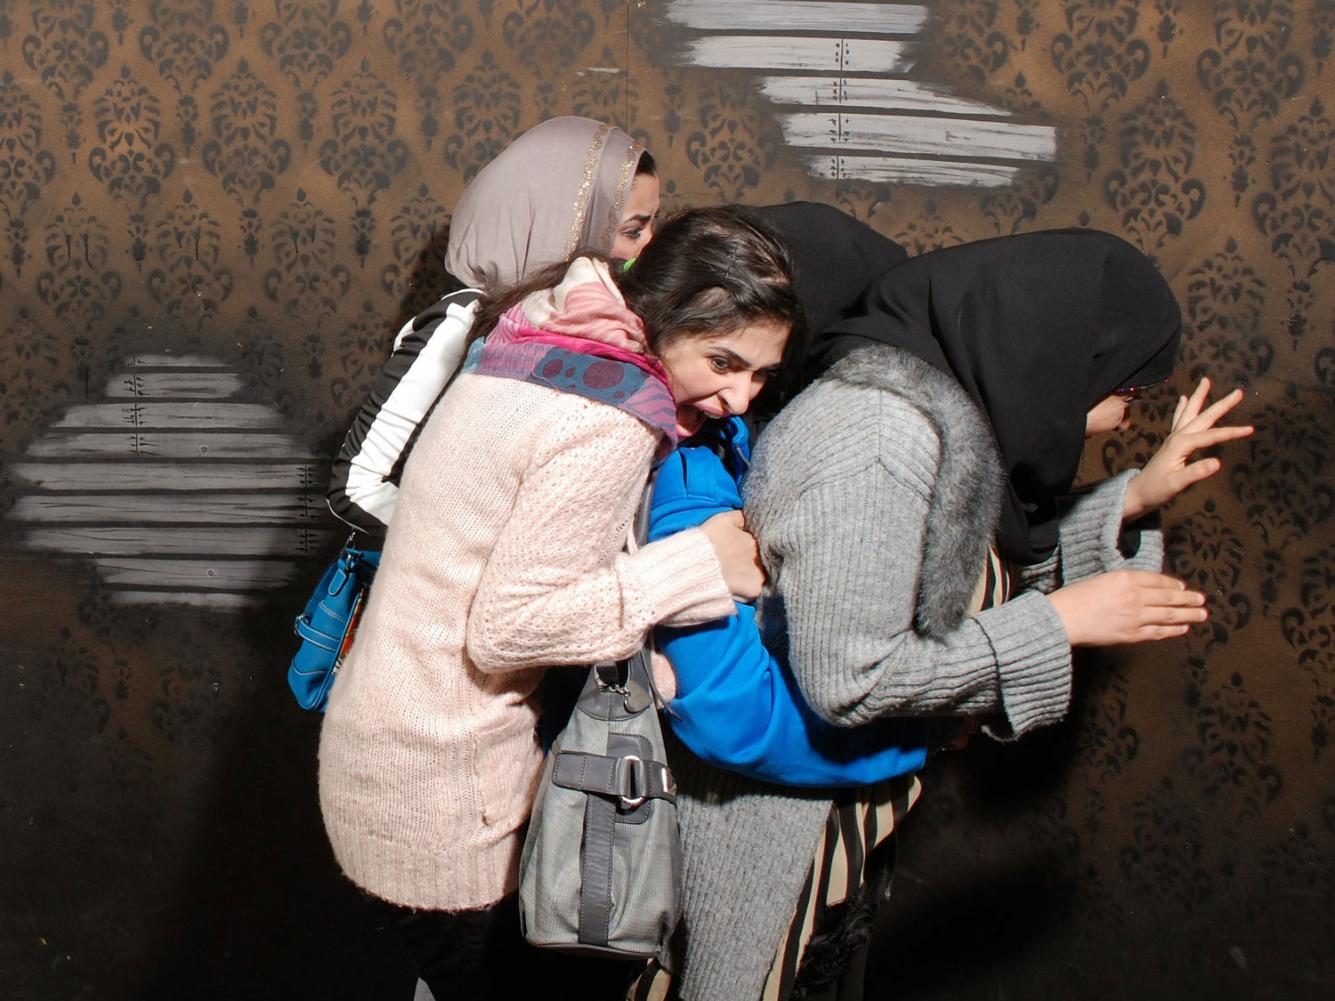 Nightmares Fear Factory Top 40 September 2013 pic0061